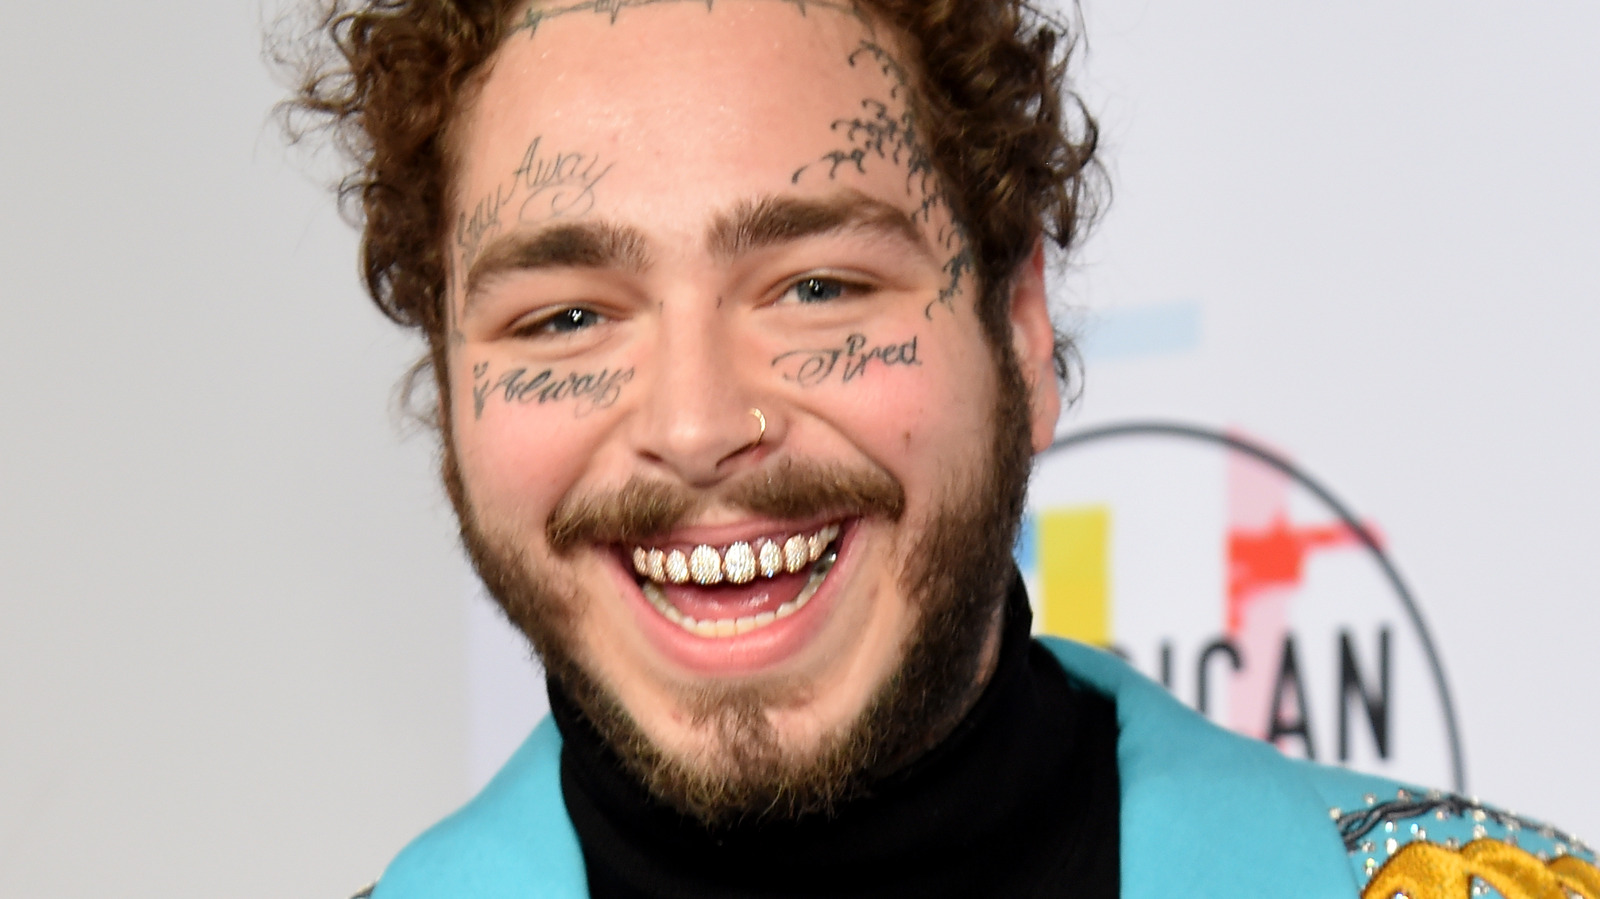 Post Malone gifts himself with new face tattoo for New Year